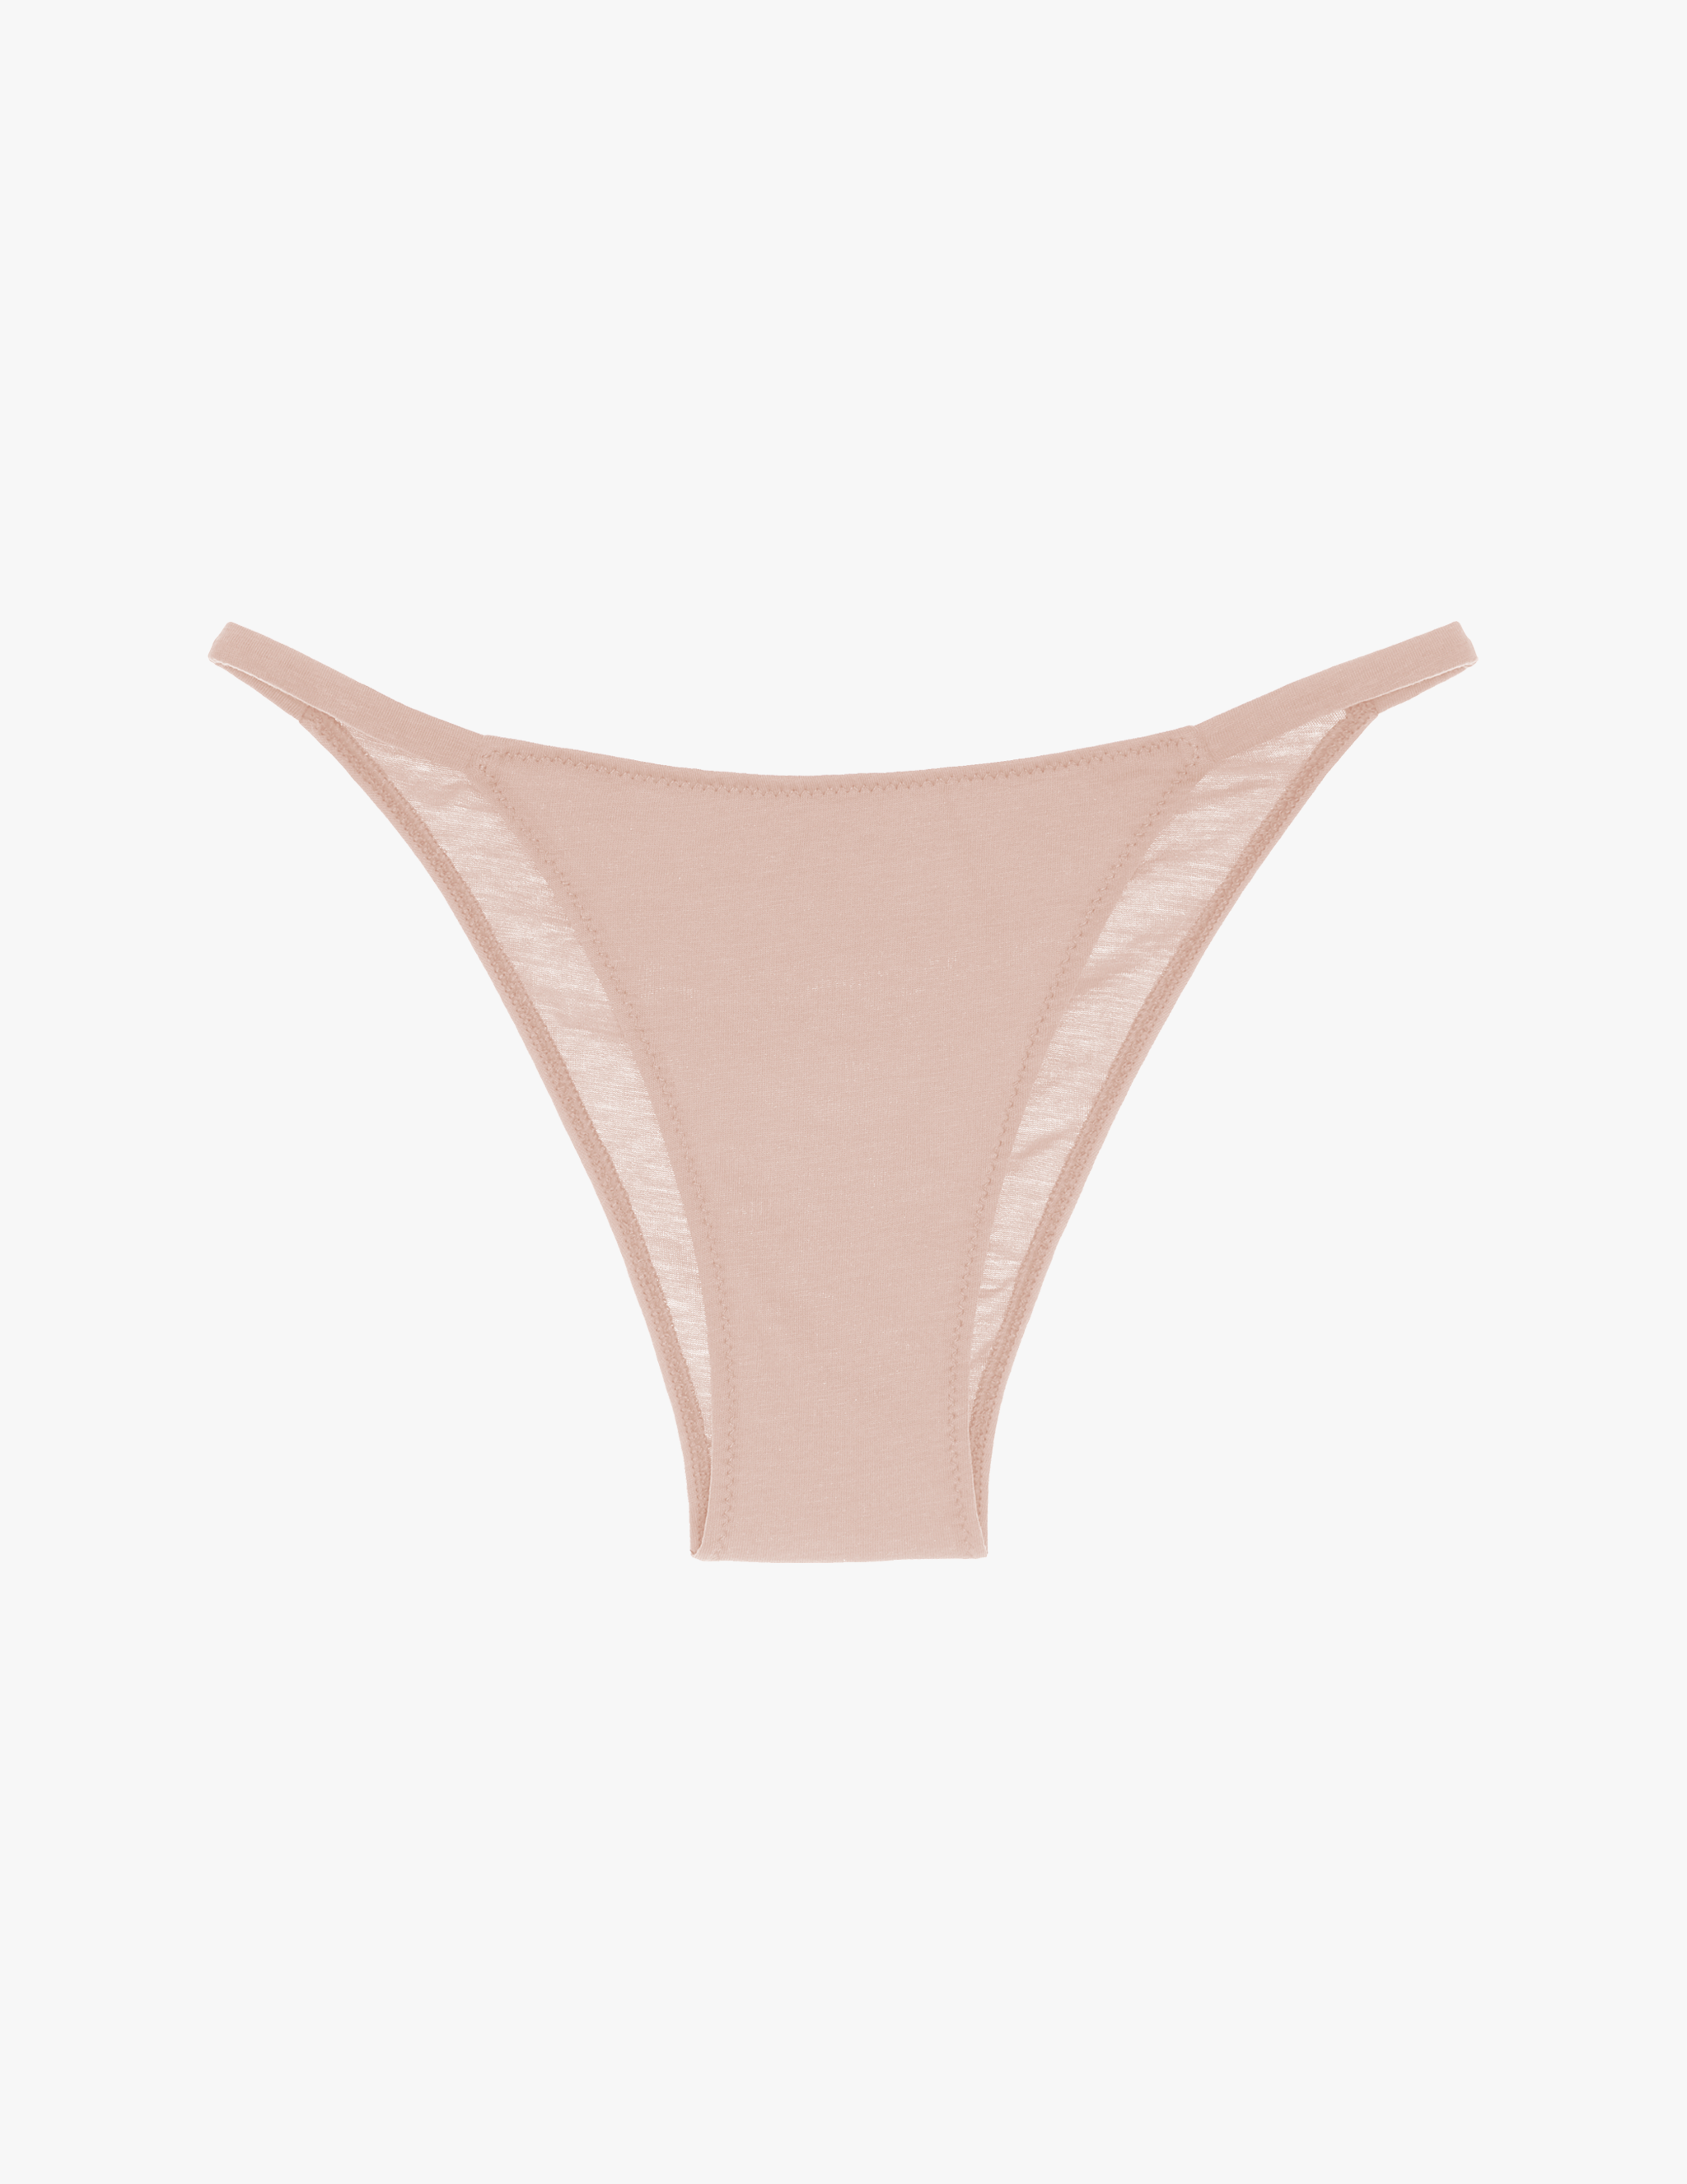 Mix & Match Panties  3 for $55 – Lounge Underwear